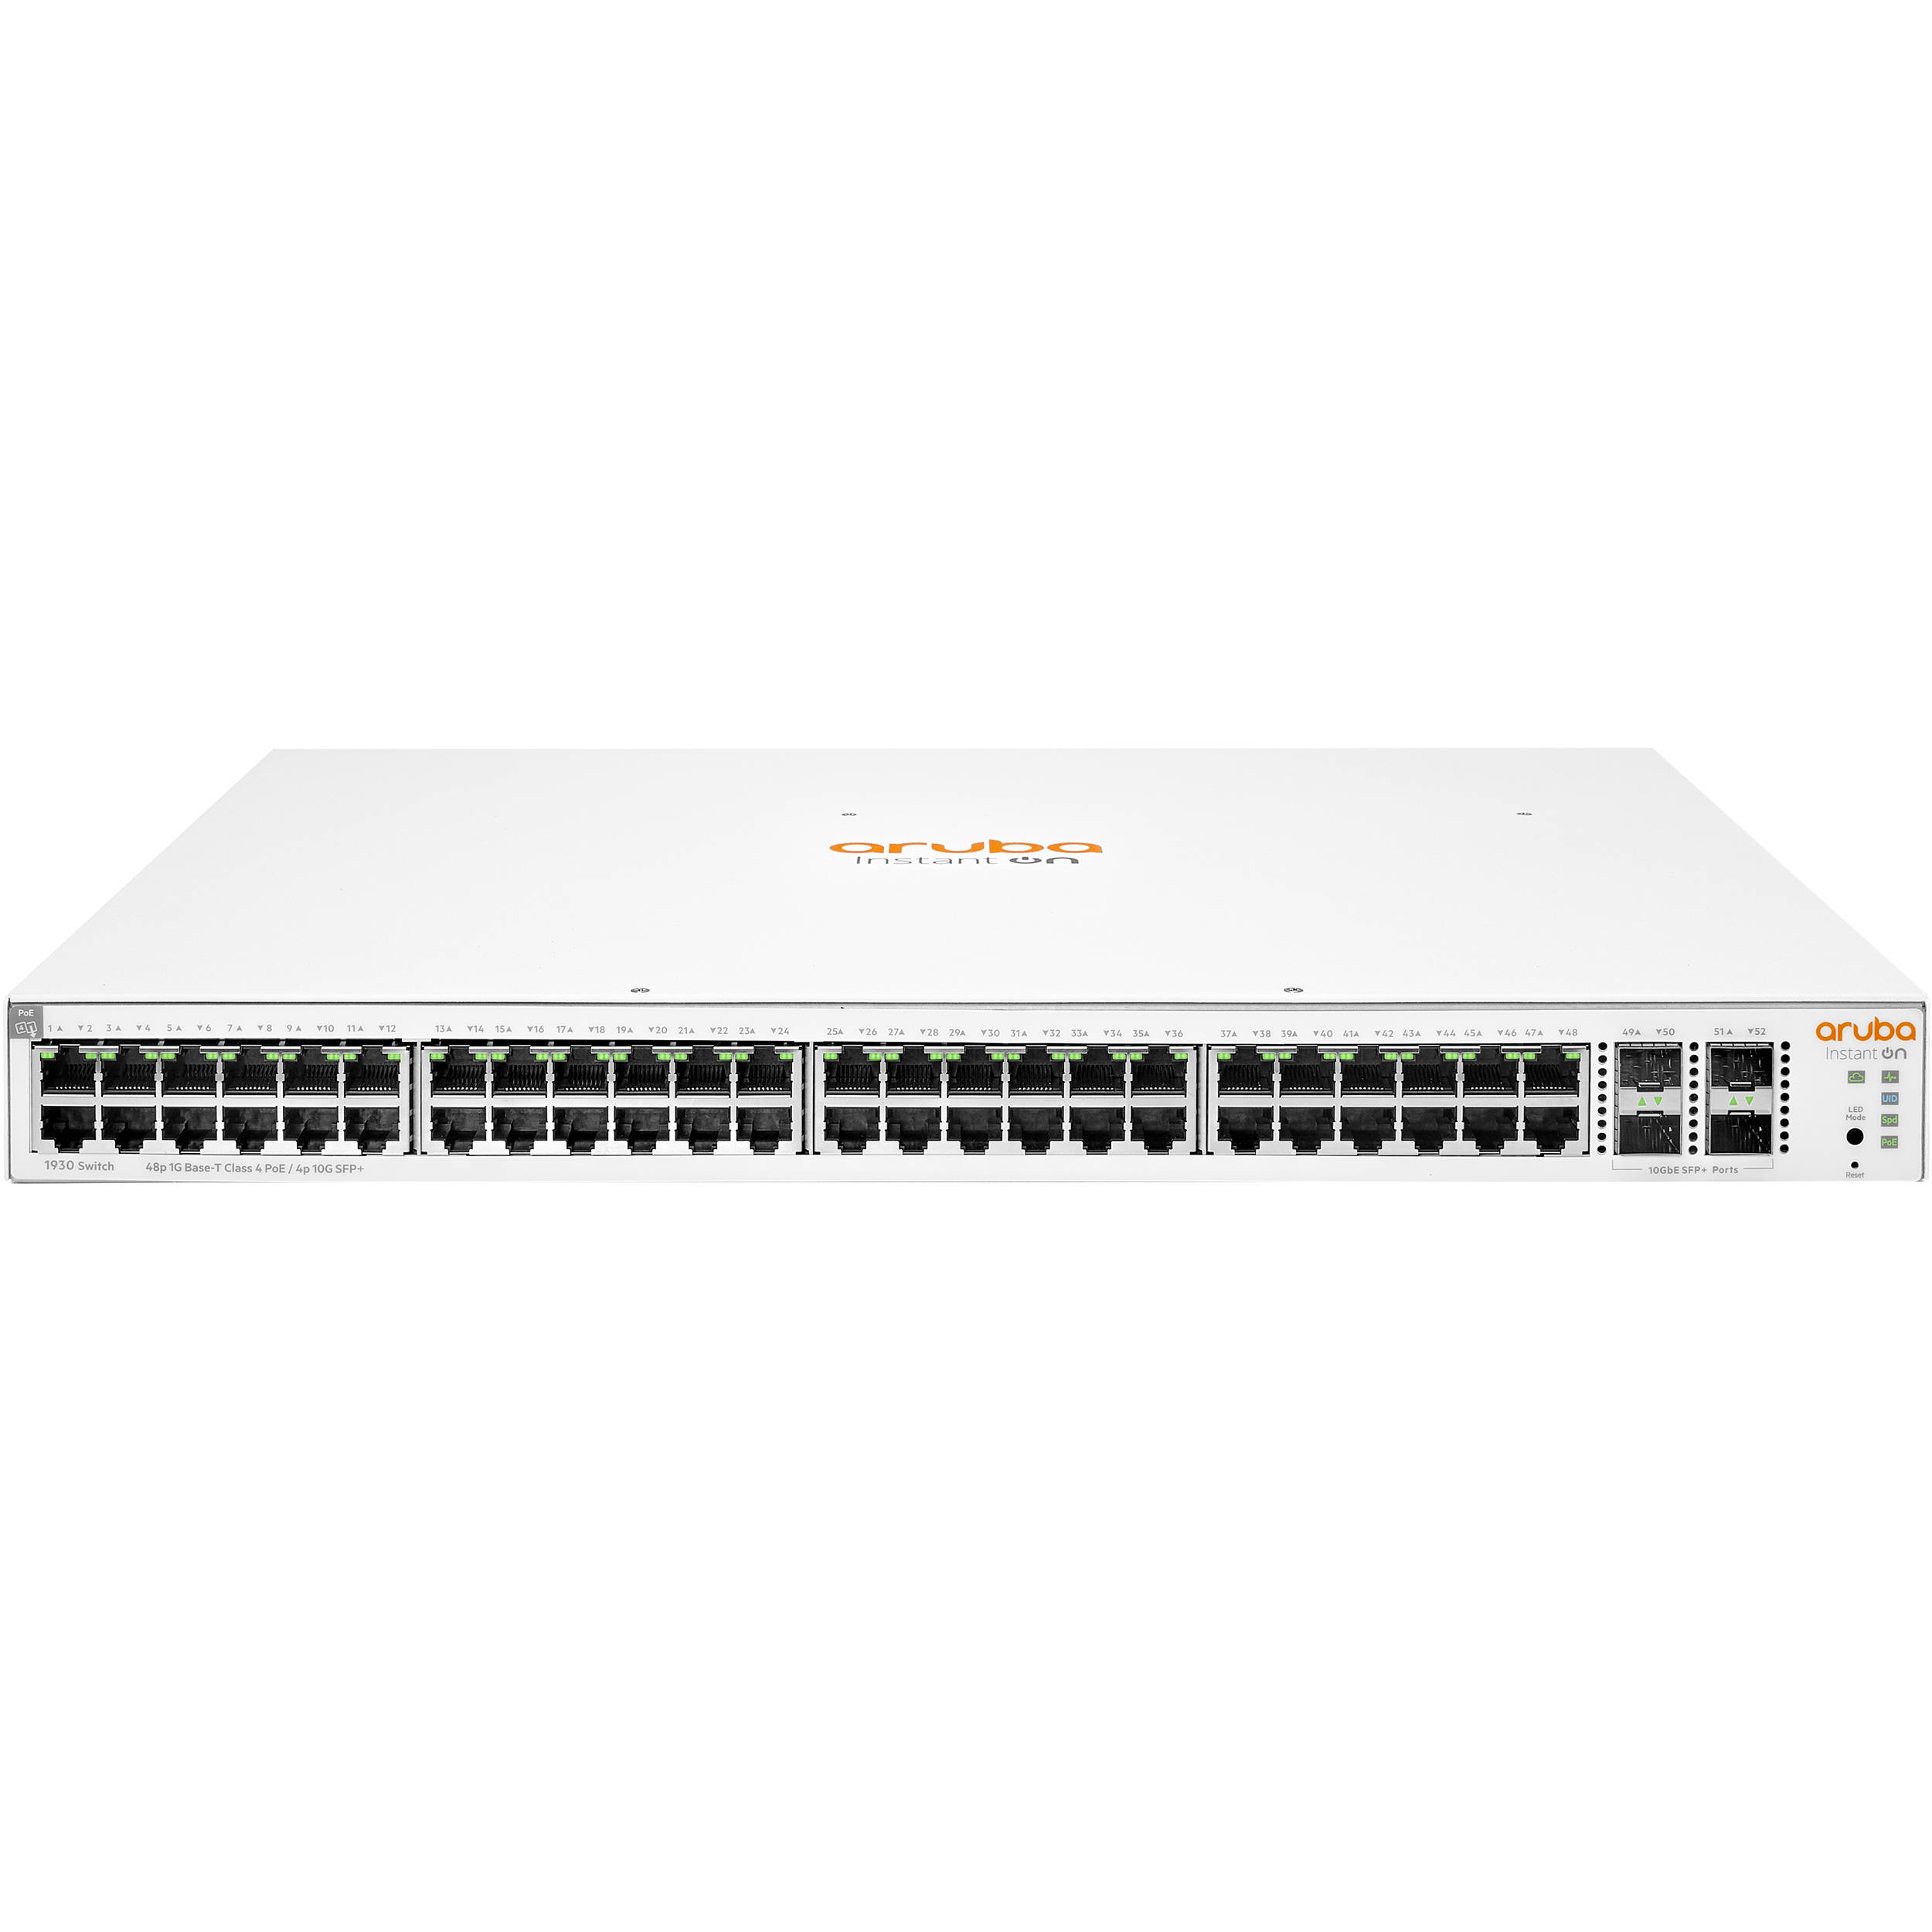 JL686A | 48-Port Gigabit PoE+ Compliant Managed Switch with 10Gb SFP+